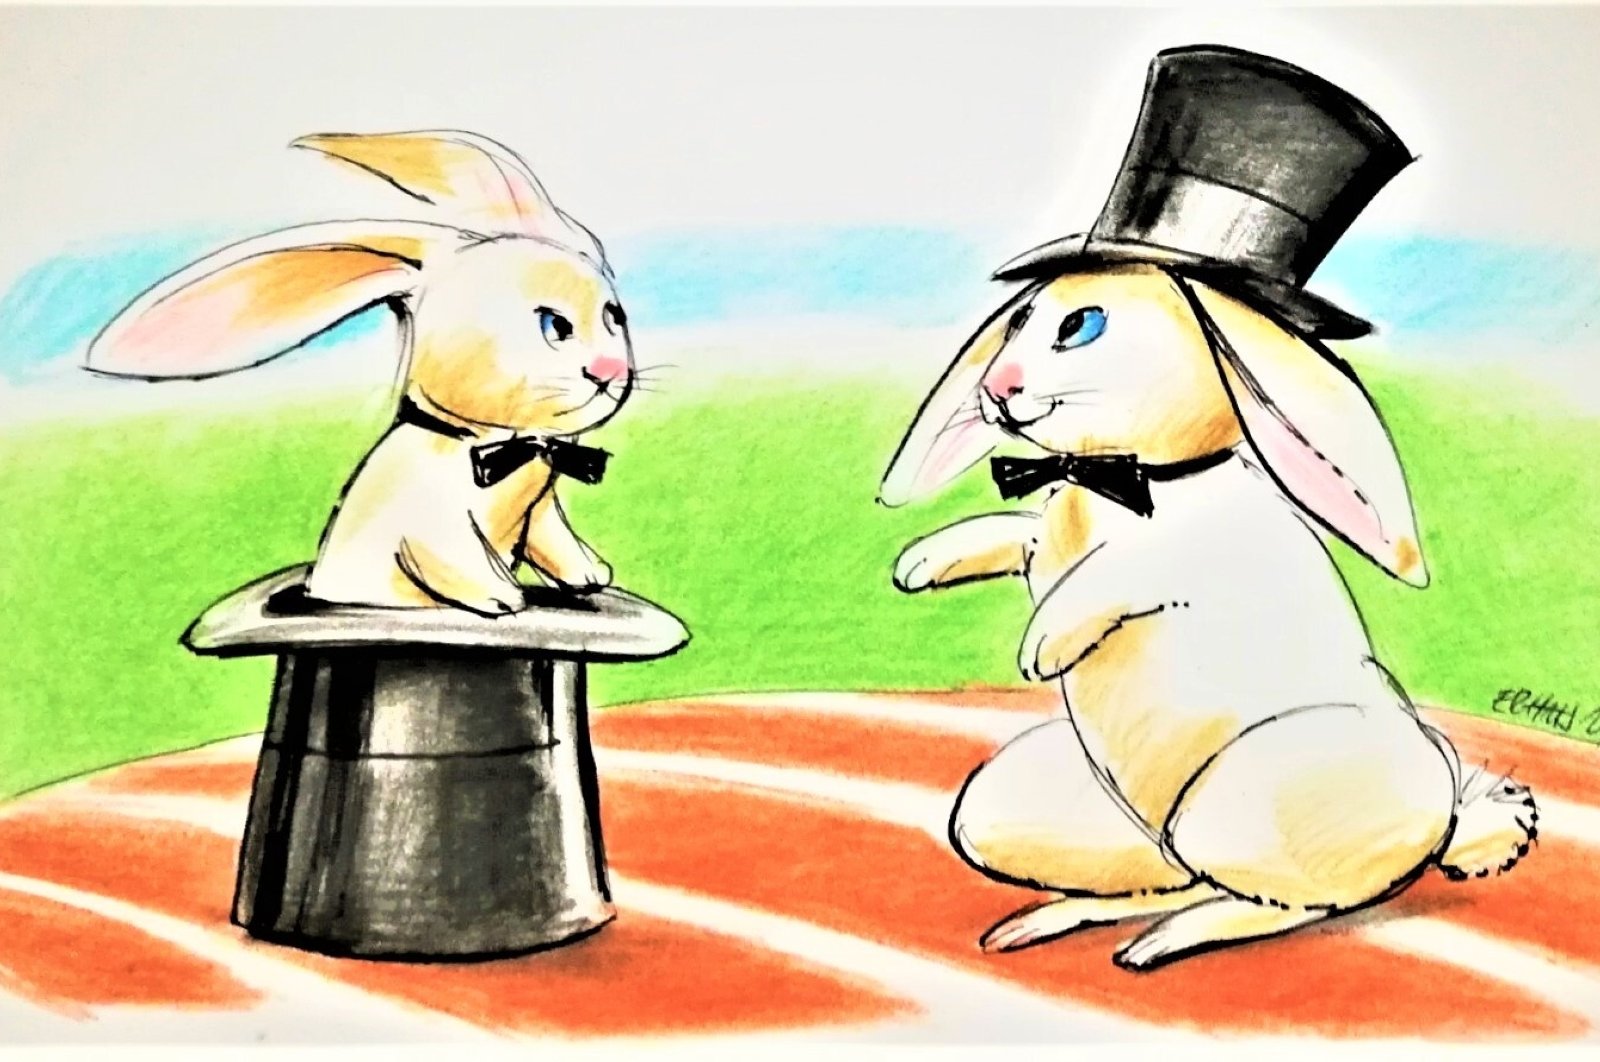 Illustration by Erhan Yalvaç showing two rabbits in magician hats, symbolizing the still undetermined candidates of Turkish opposition parties for the 2023 elections.